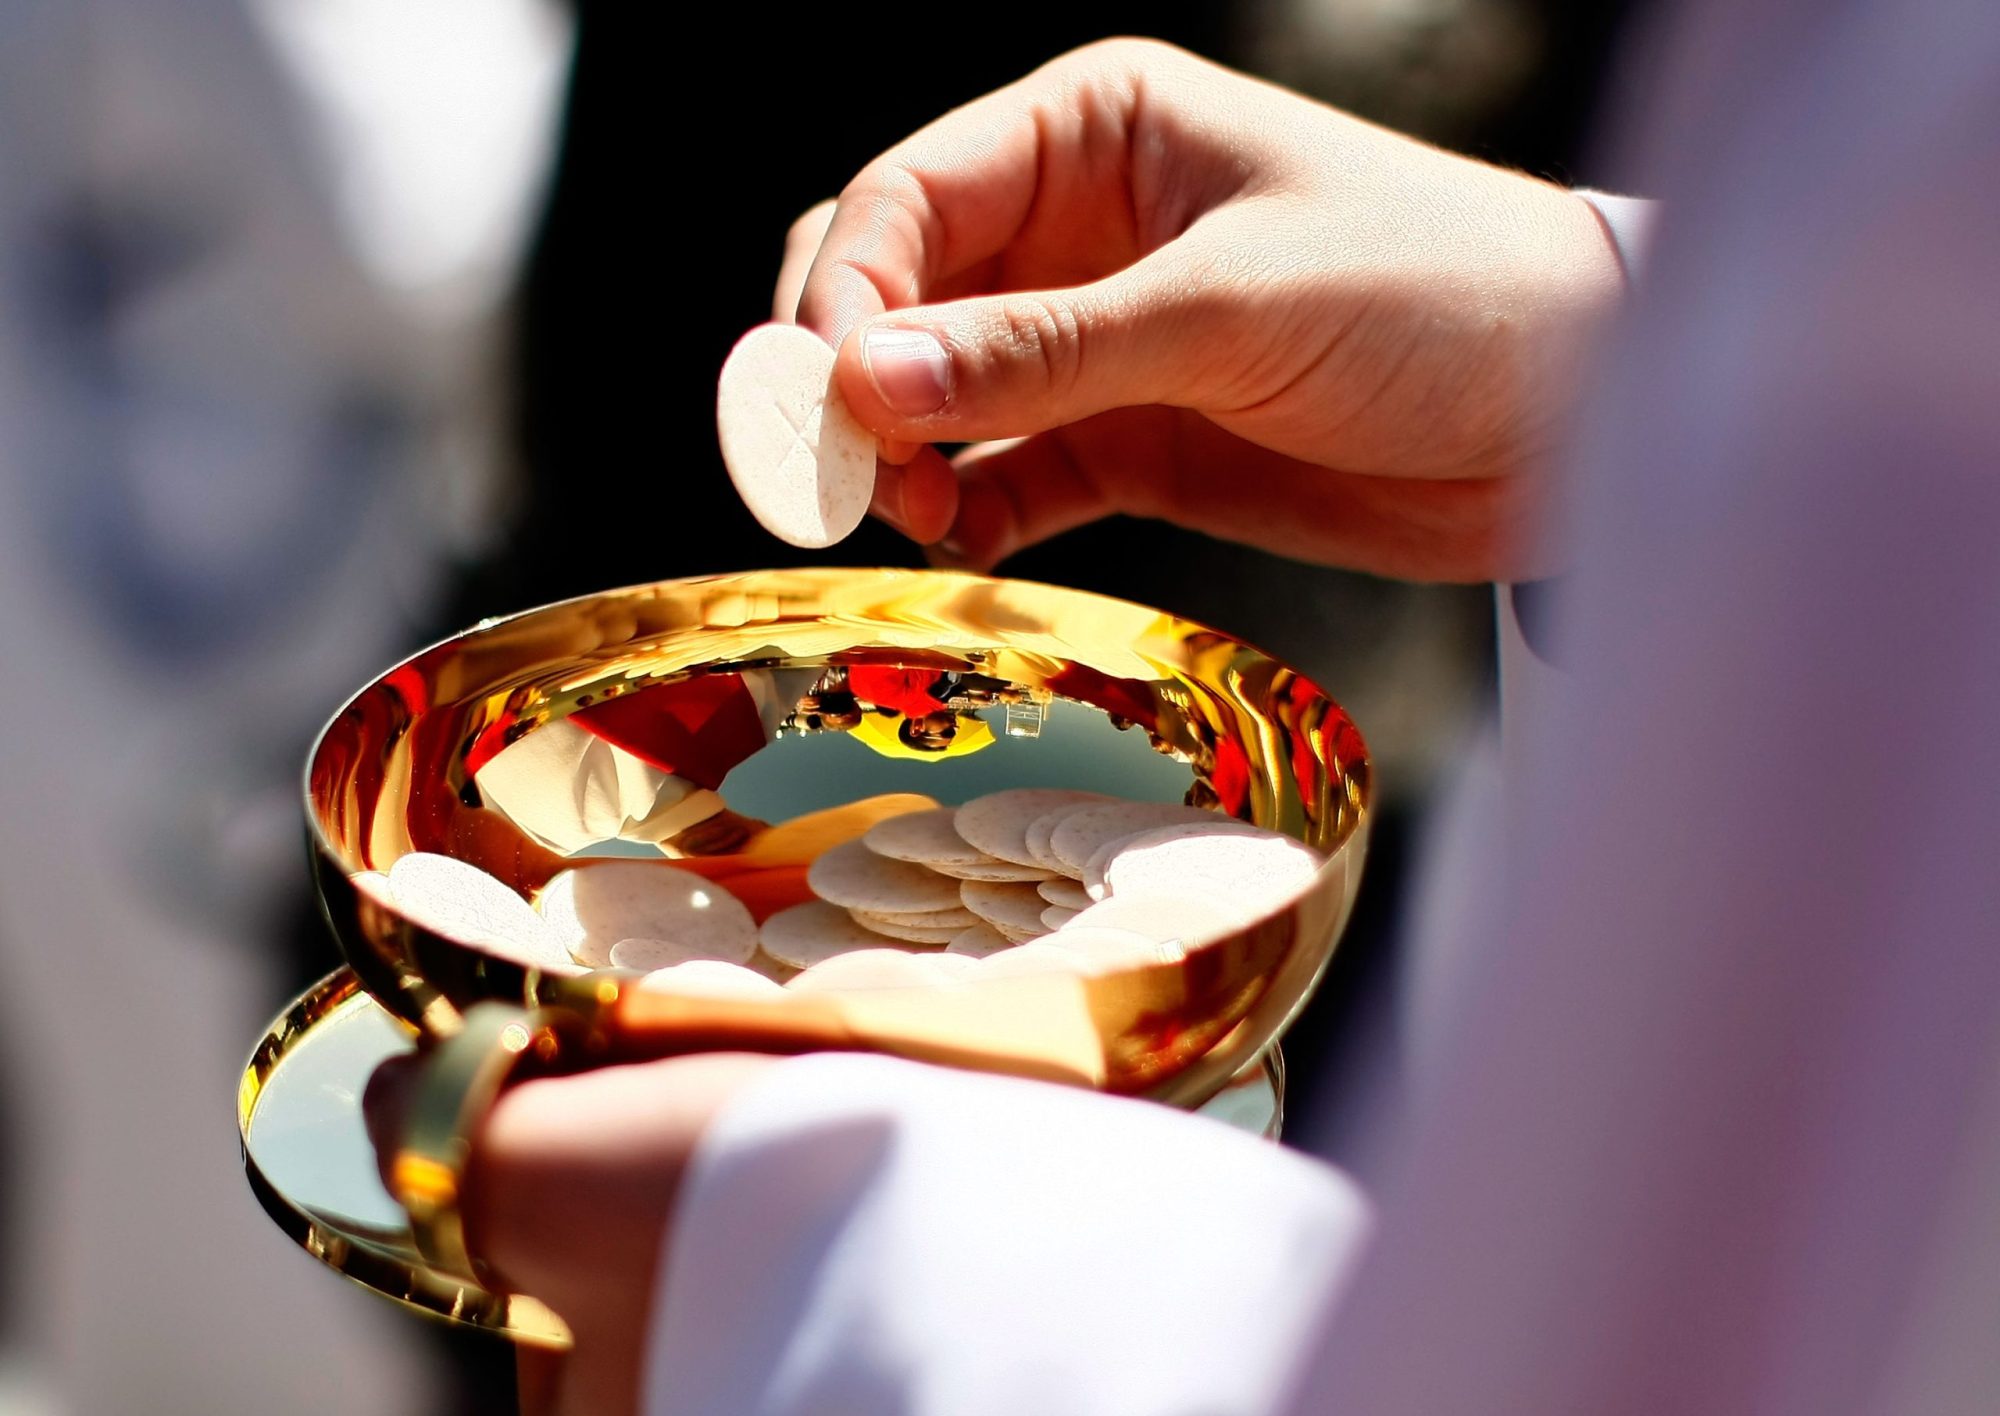 A hand holding a wafer over a gold bowl.